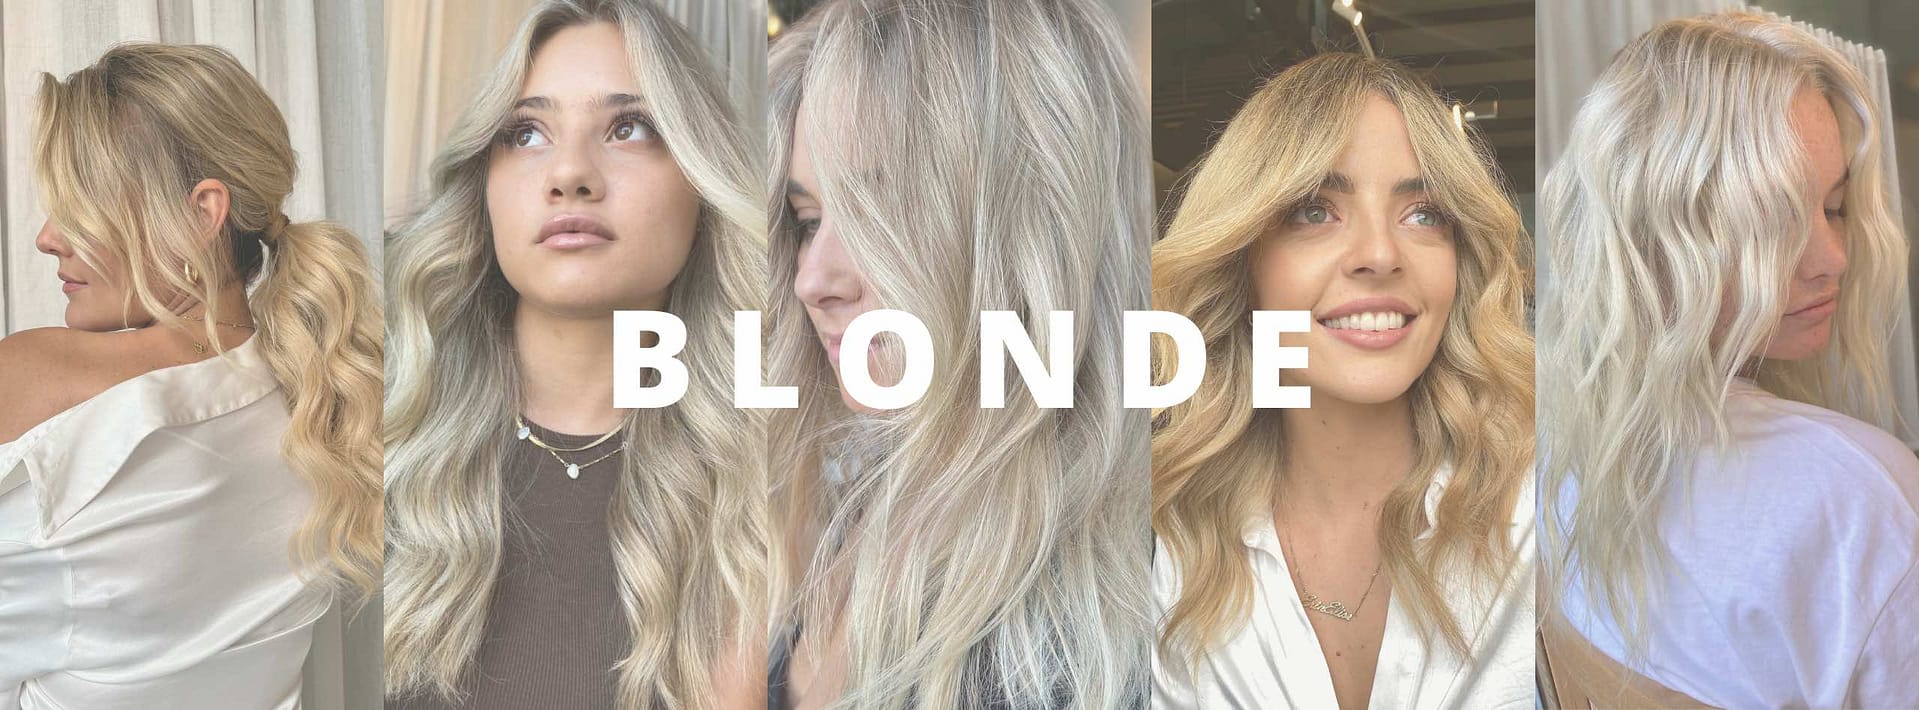 blonde haircare banner